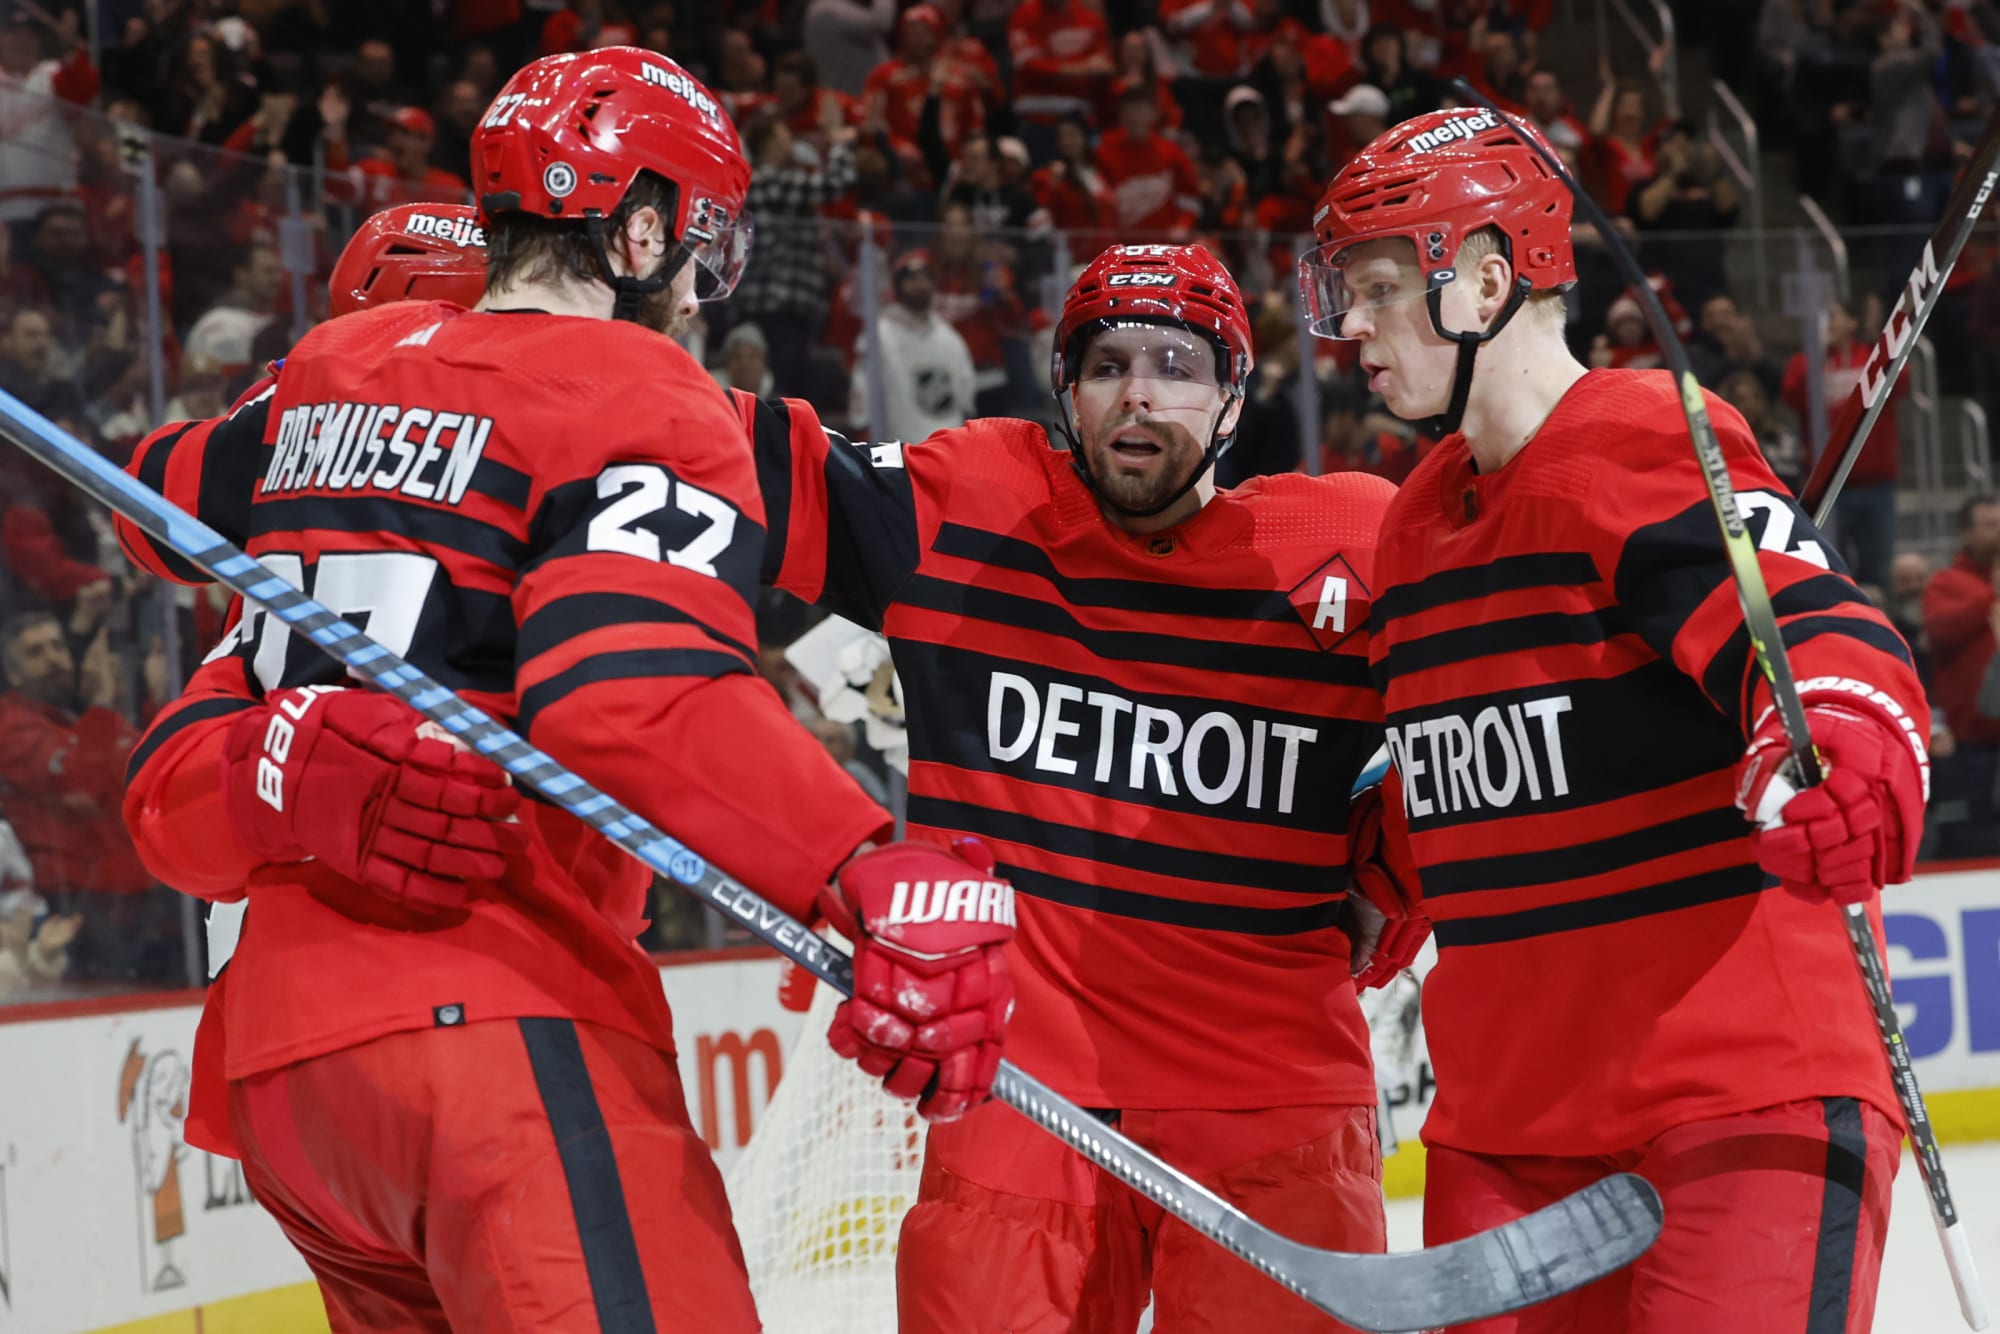 Detroit Red Wings: Dylan Larkin collects his 400th career point vs